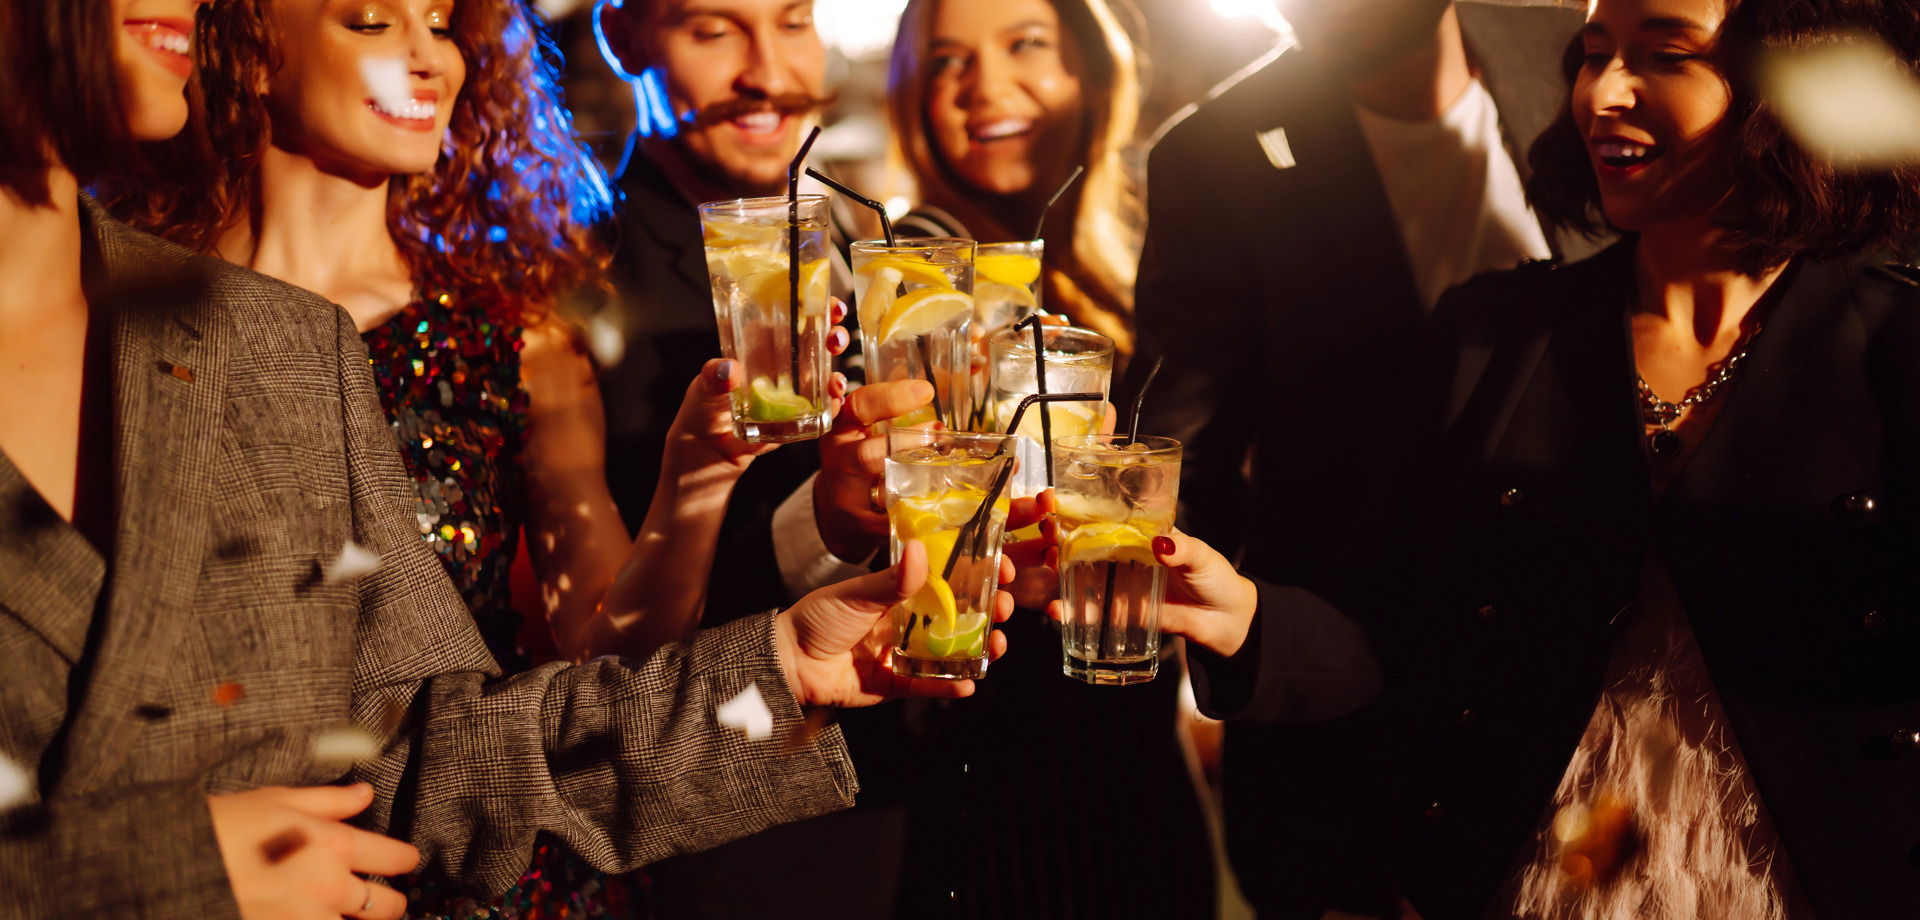 People in a group, celebrating with drinks 